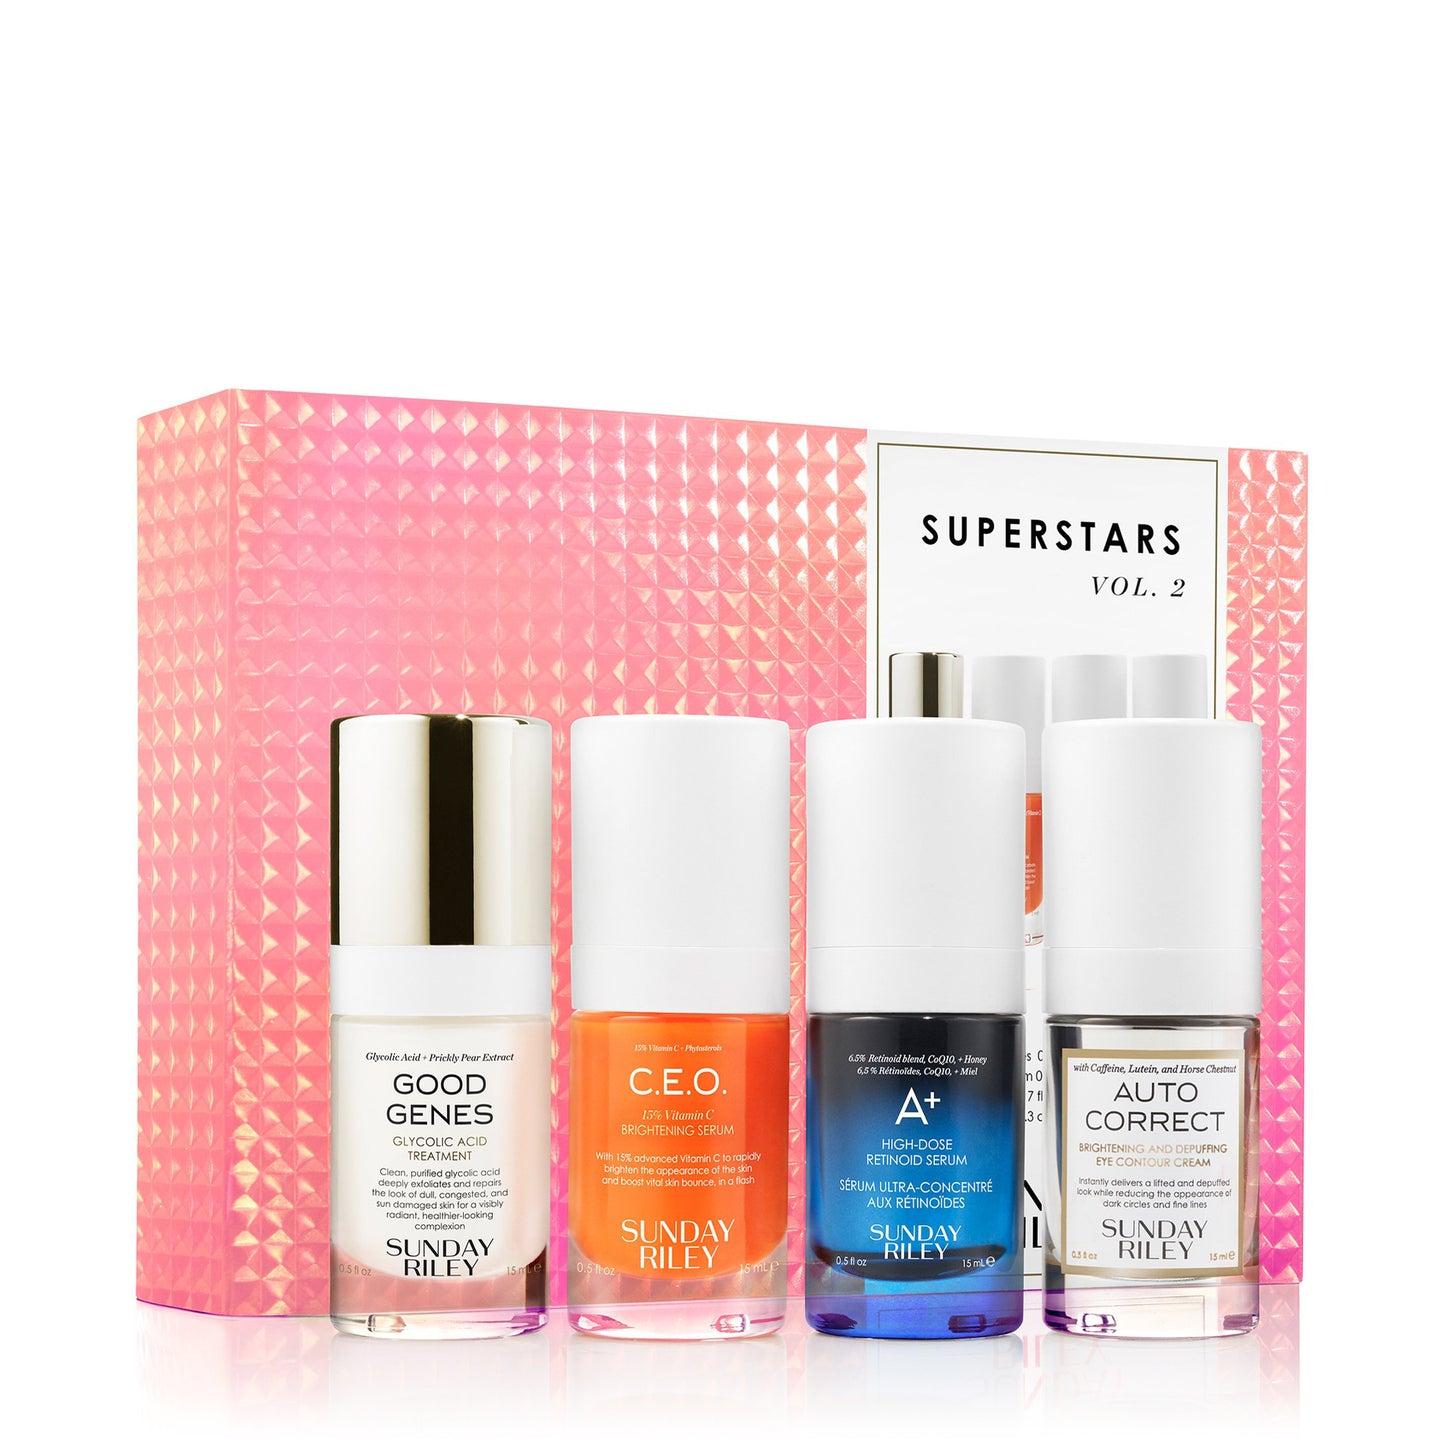 Product contents of Superstars Kit in front of salmon pink iridescent textured box. Kit contains 15ml bottles of Good Genes Glycolic Acid, CEO Serum, A+ Treatment, and Auto Correct Eye Cream